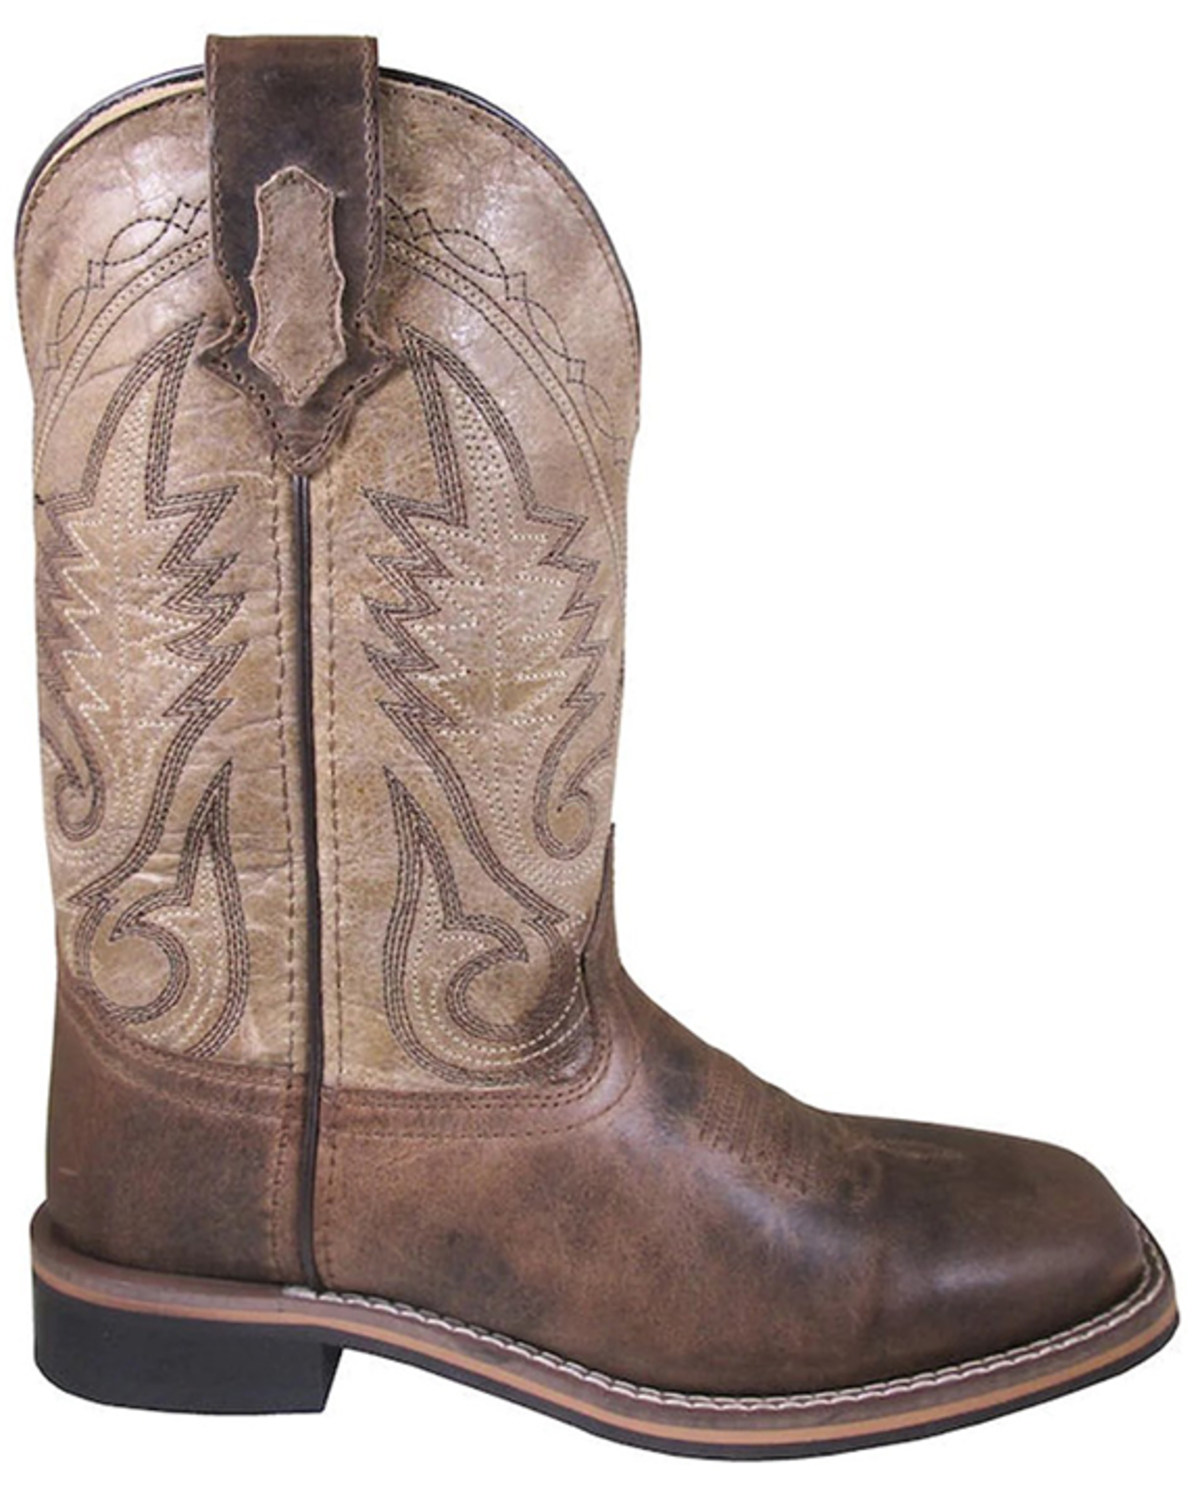 Smoky Mountain Women's Creekland Performance Western Boots - Broad Square Toe